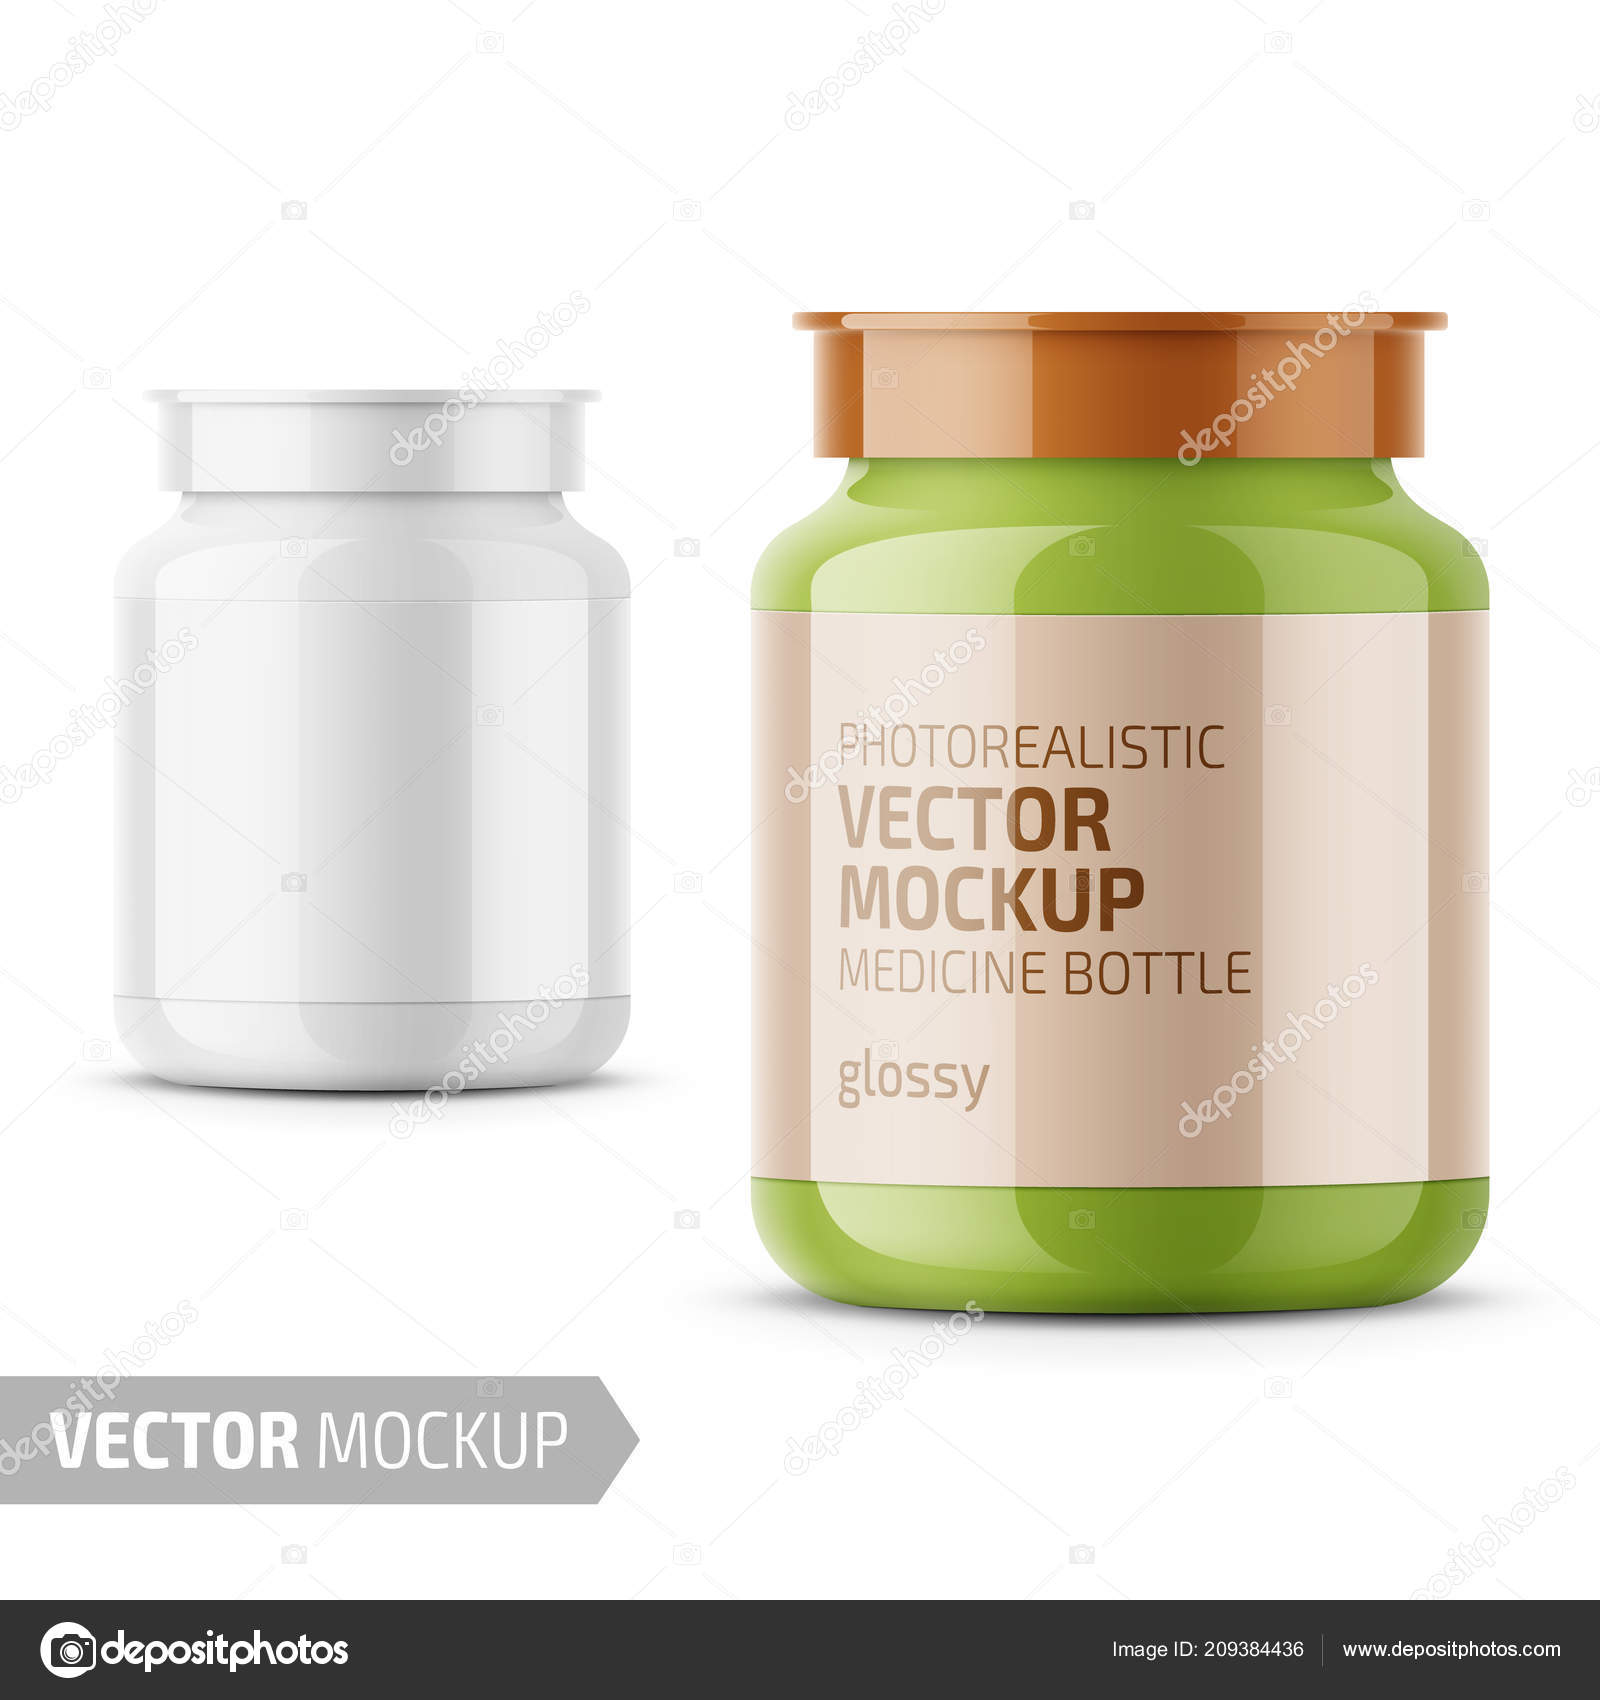 Download White Glossy Medicine Bottle Snap Lid Tablets Pills Drugs Photo Vector Image By C Gruffi Vector Stock 209384436